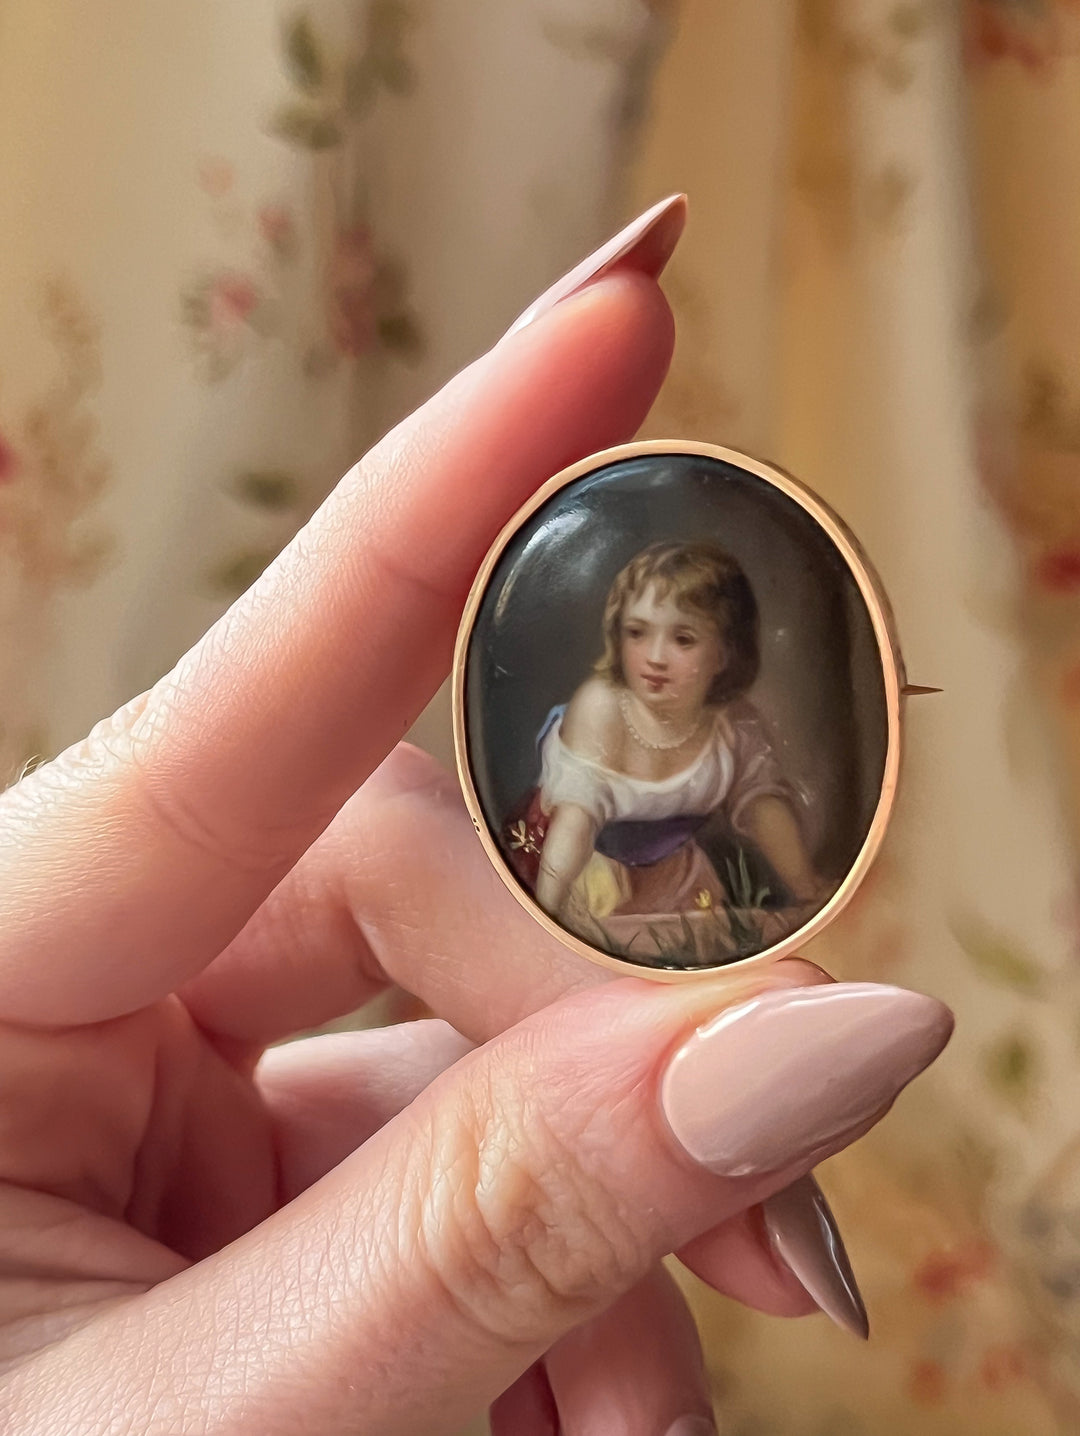 Porcelain Portrait of a Young Girl Wearing Pearls